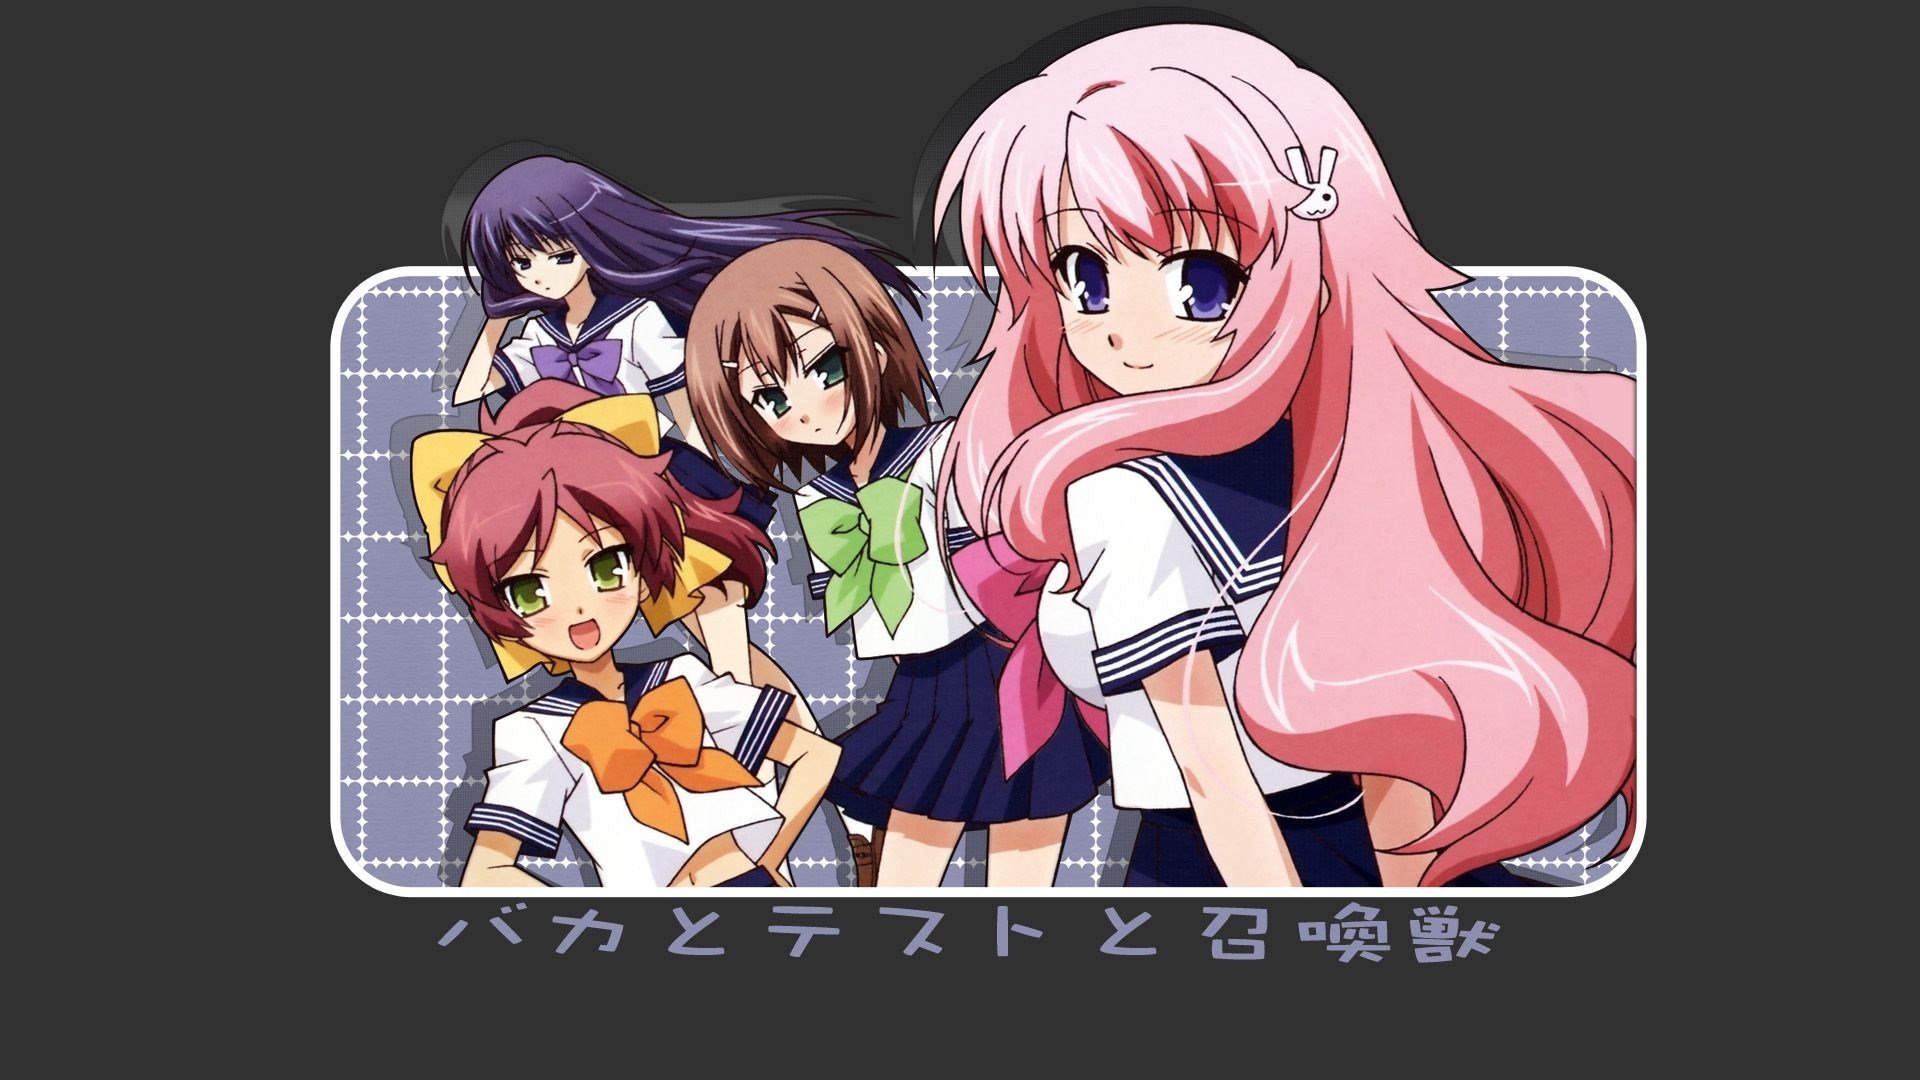 Baka And Test Hd Wallpaper Background Image 1920x1080